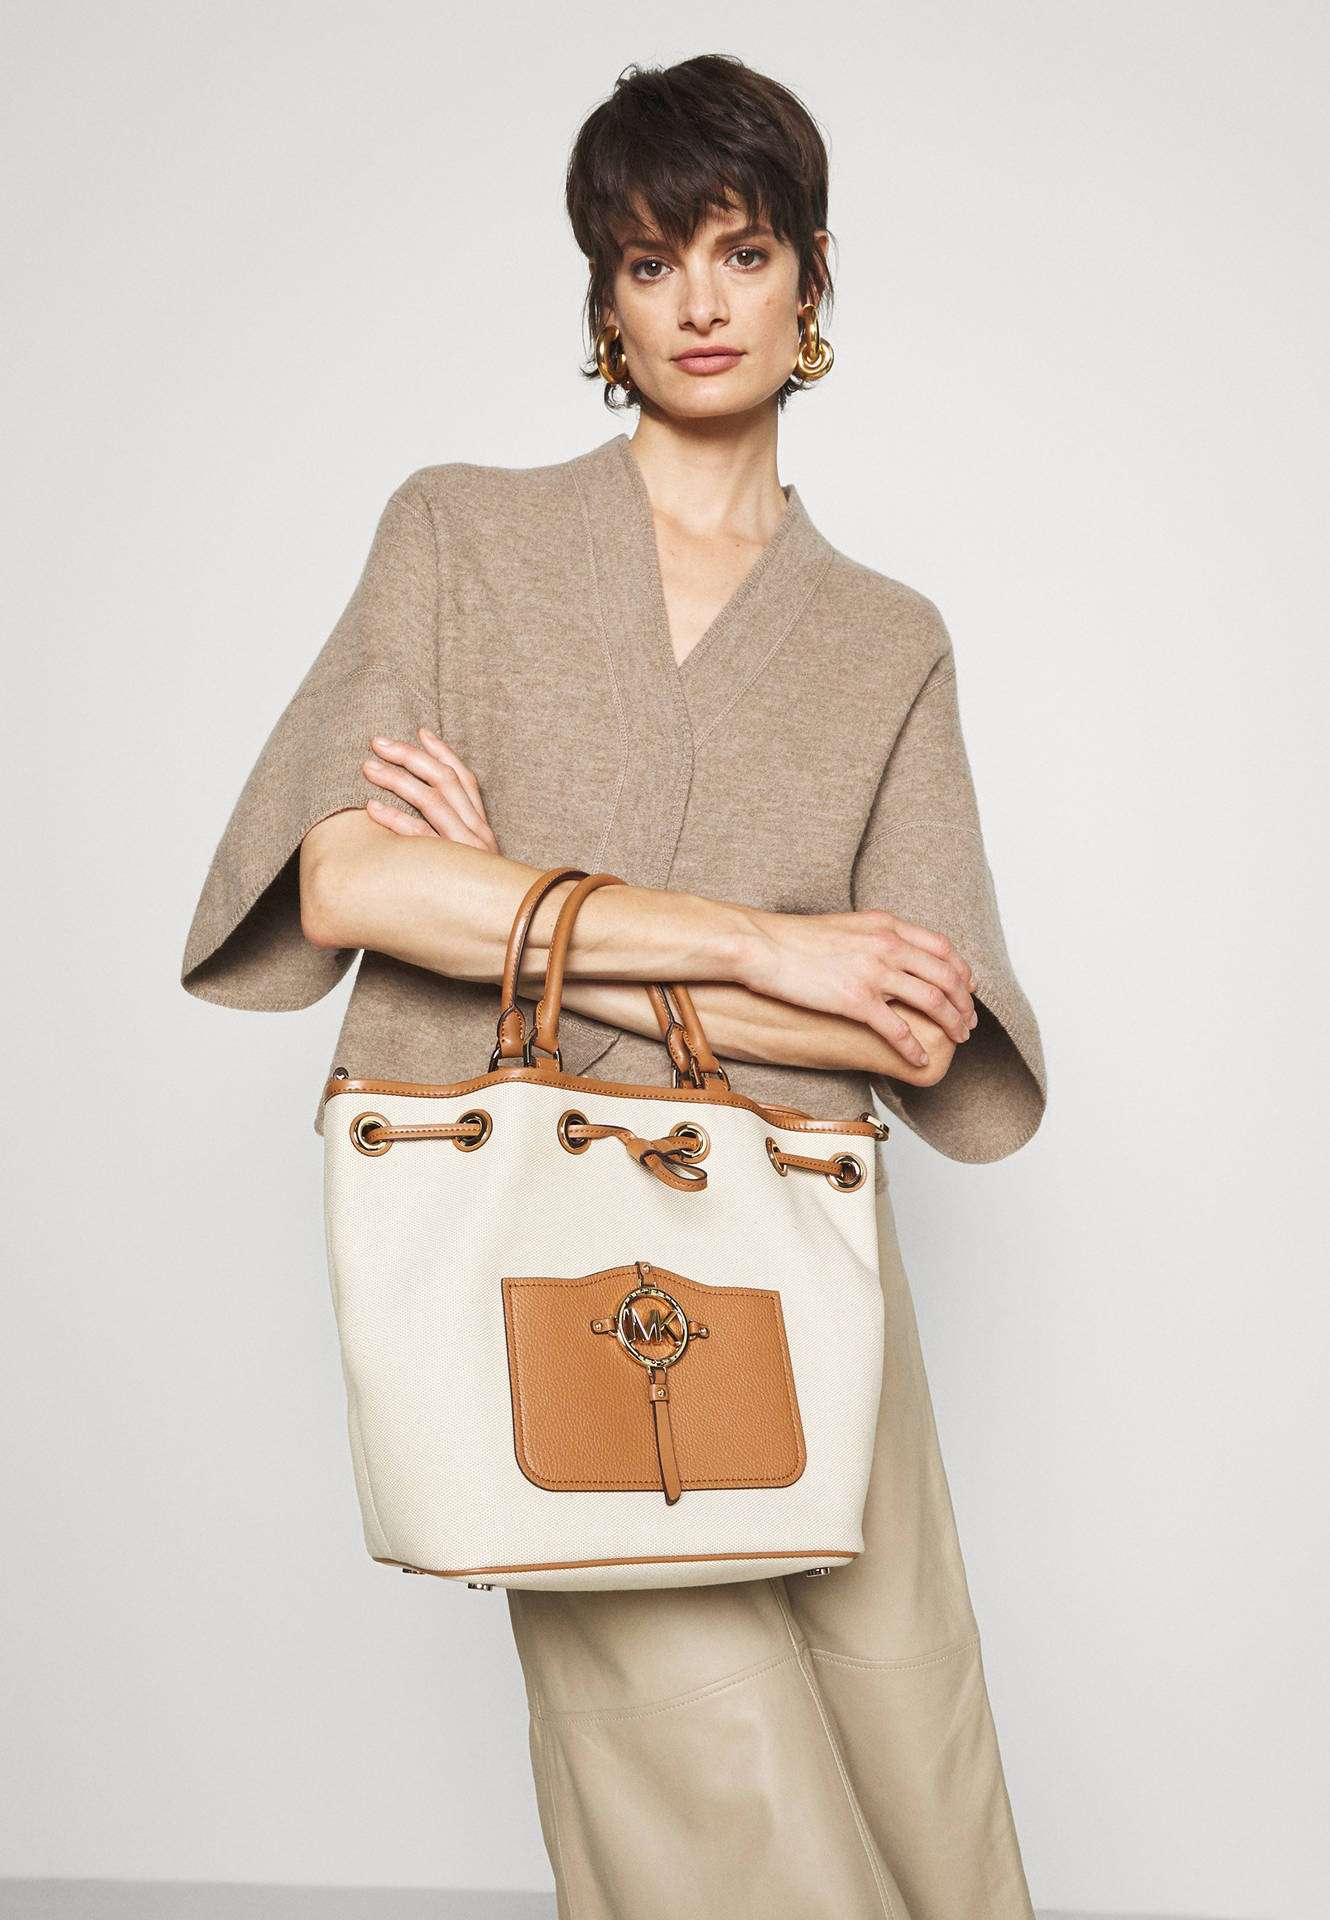 Michael Kors White And Brown Bag Background